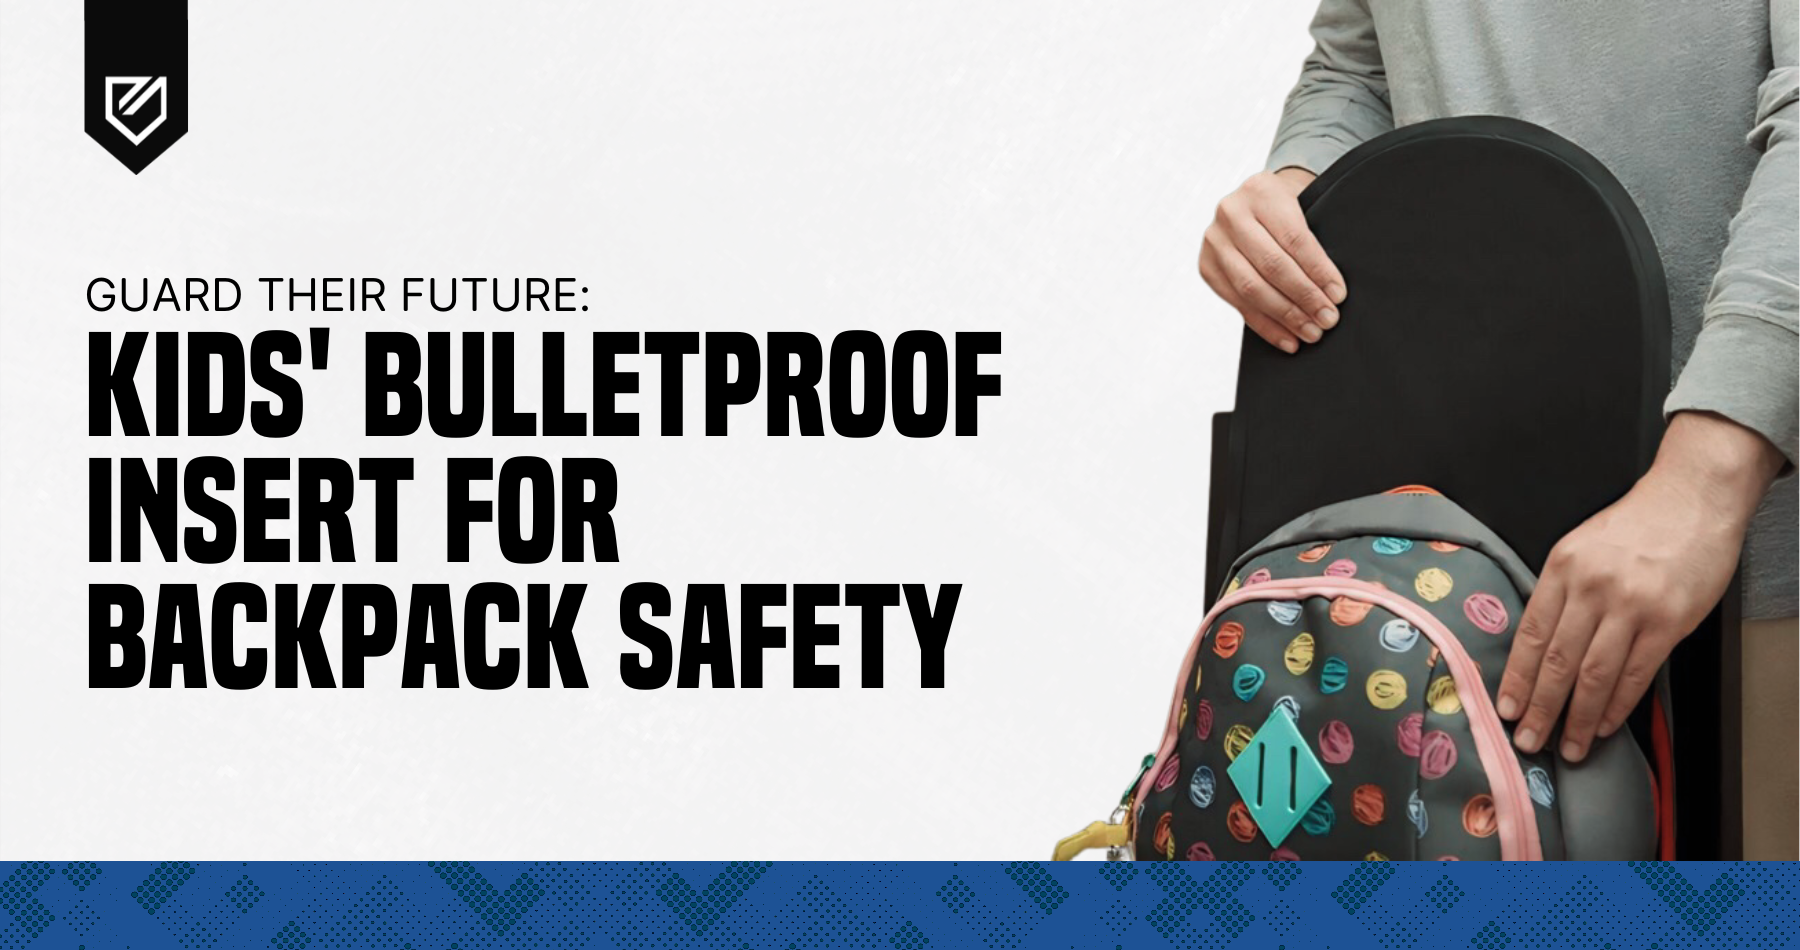 Guard Their Future: Kids' Bulletproof Insert for Backpack Safety